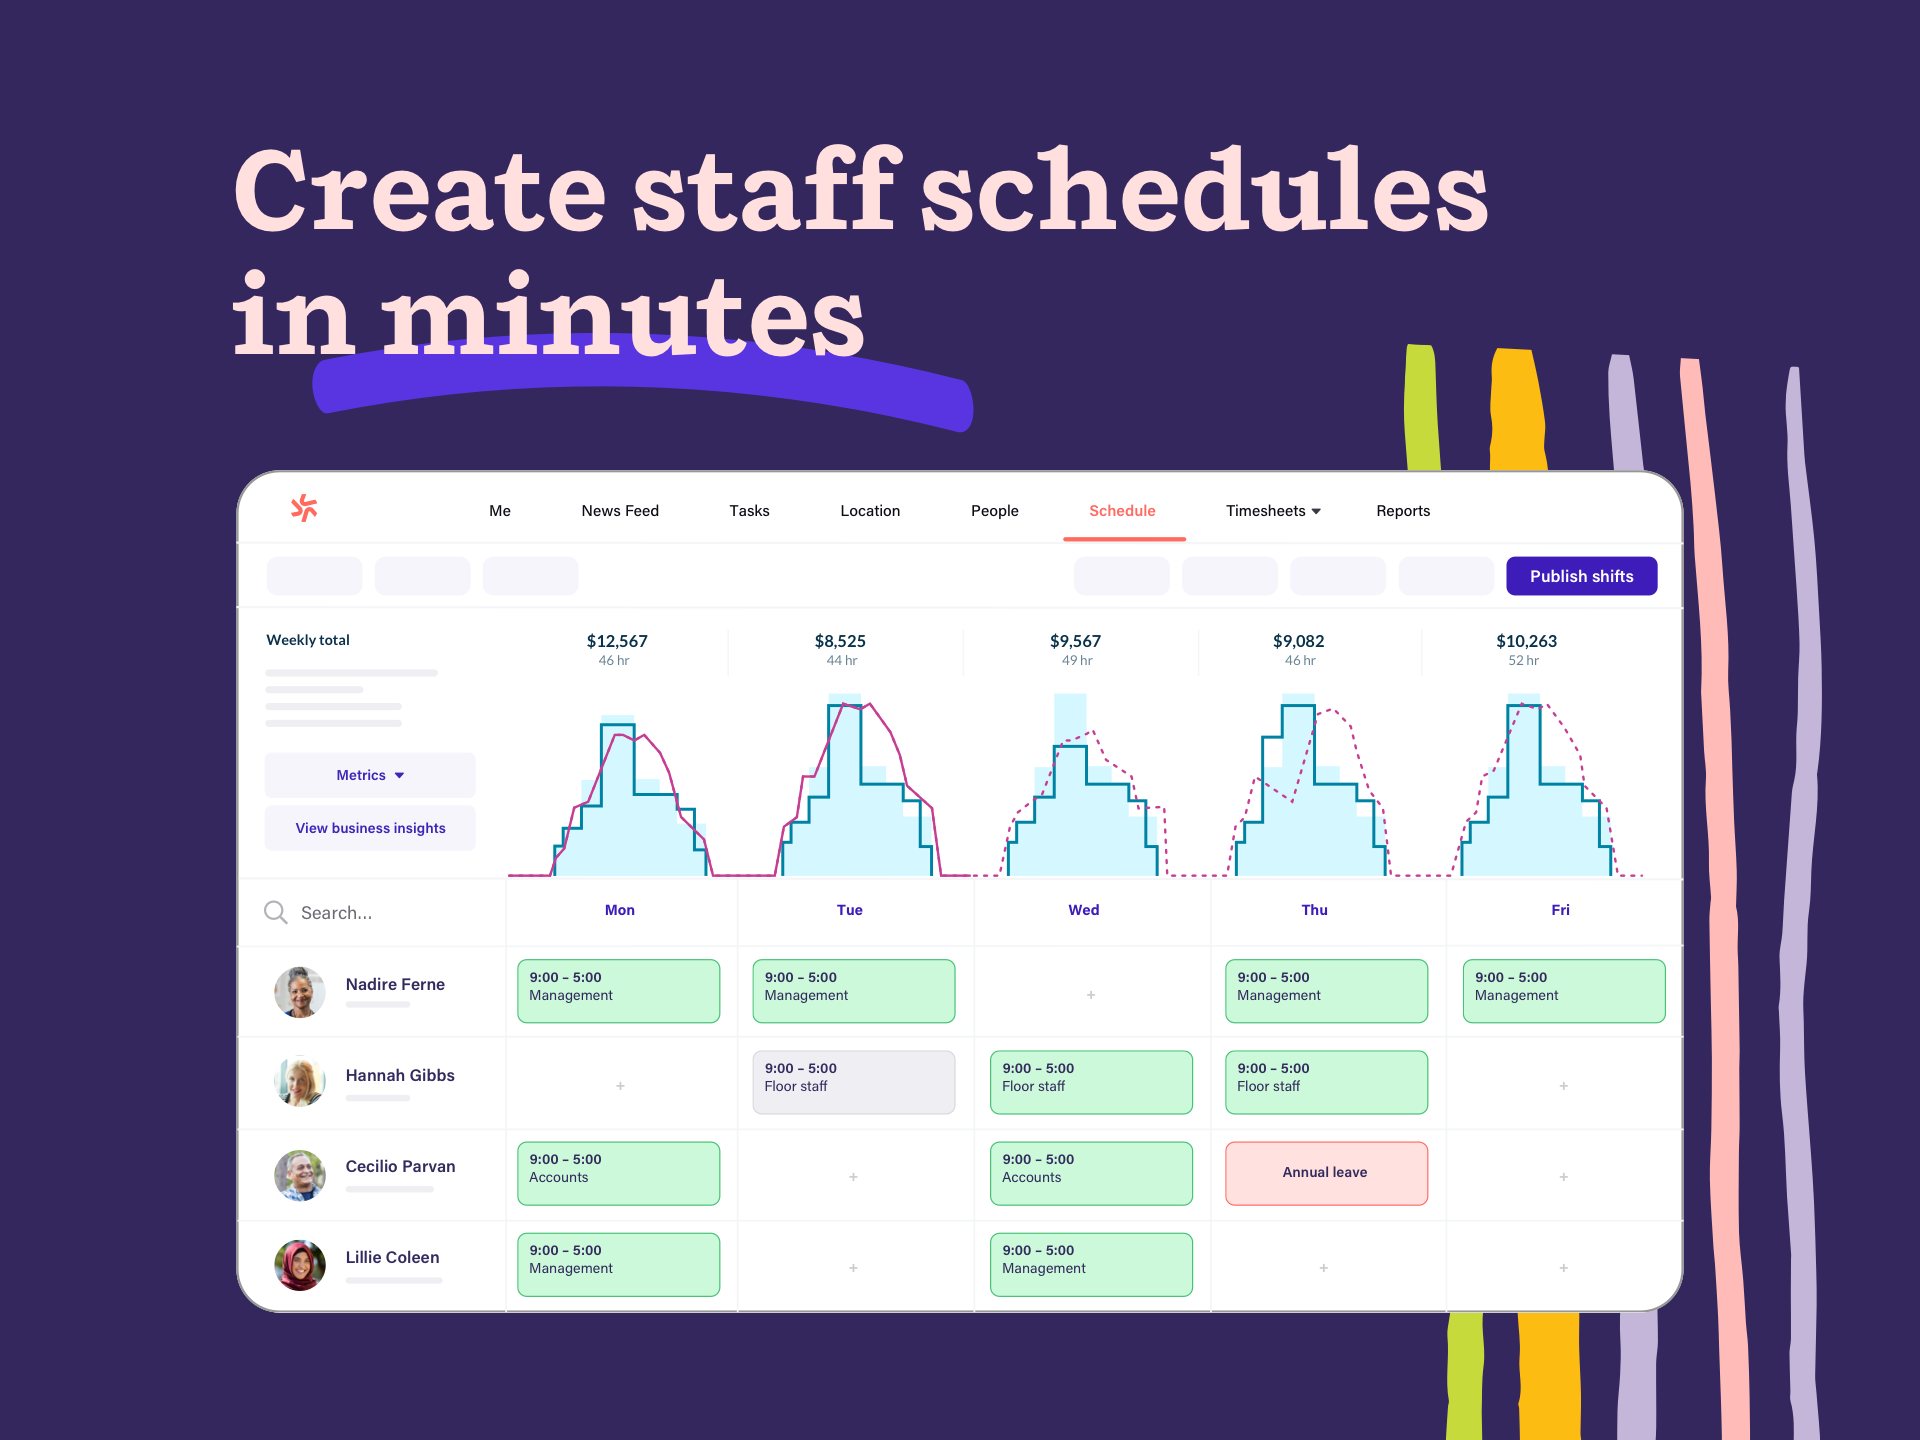 Create new shift structures instantly, drag & drop existing schedules, or use auto-scheduling to create optimized, legally compliant schedules with a single click. Notify employees about their schedules and changes via email, SMS, or push notifications.